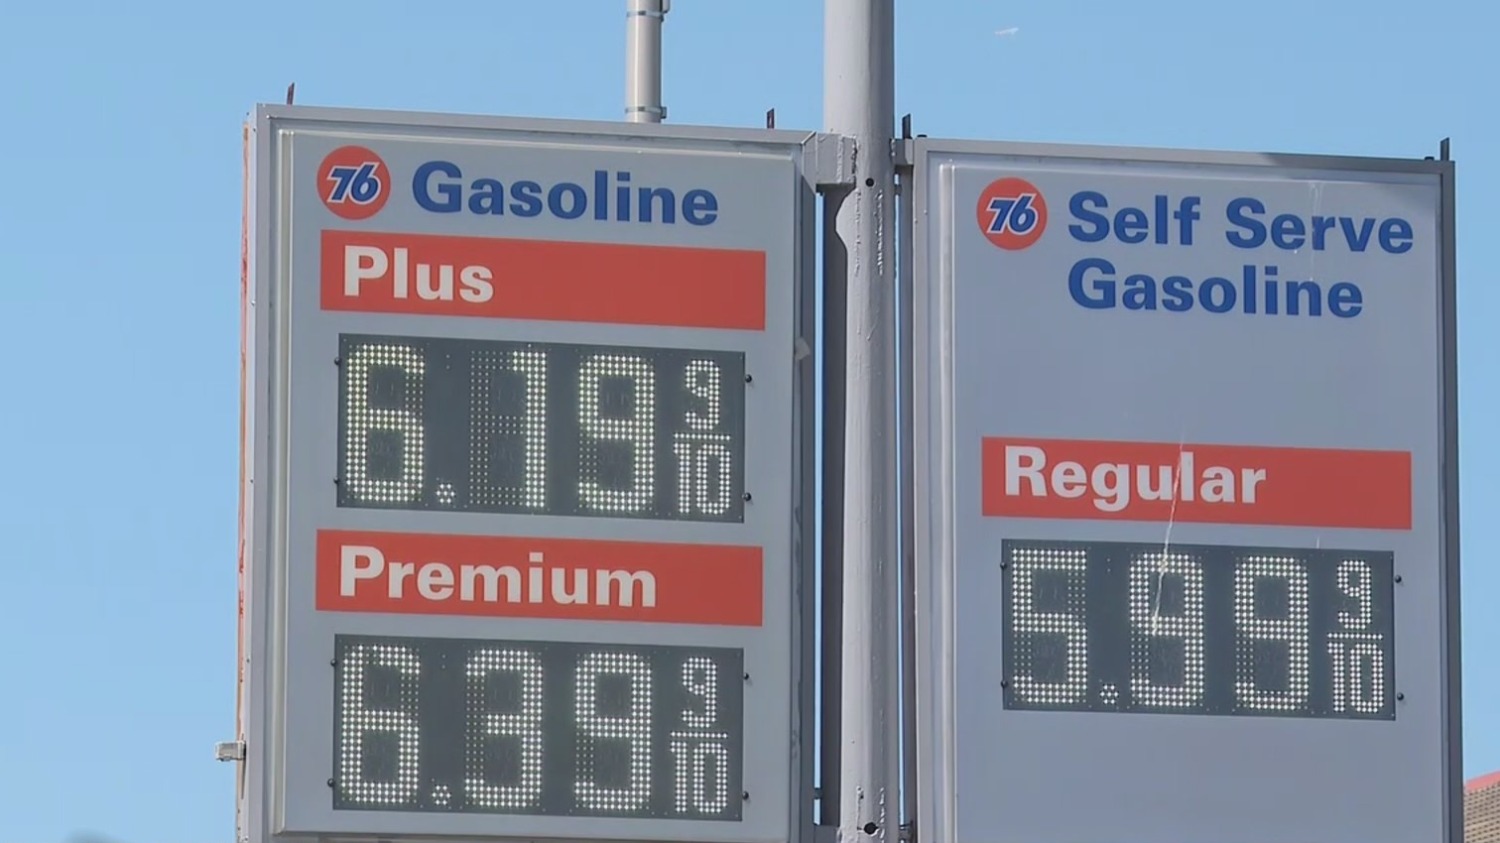 newsom-s-gas-rebate-plan-will-send-up-to-800-to-california-car-owners